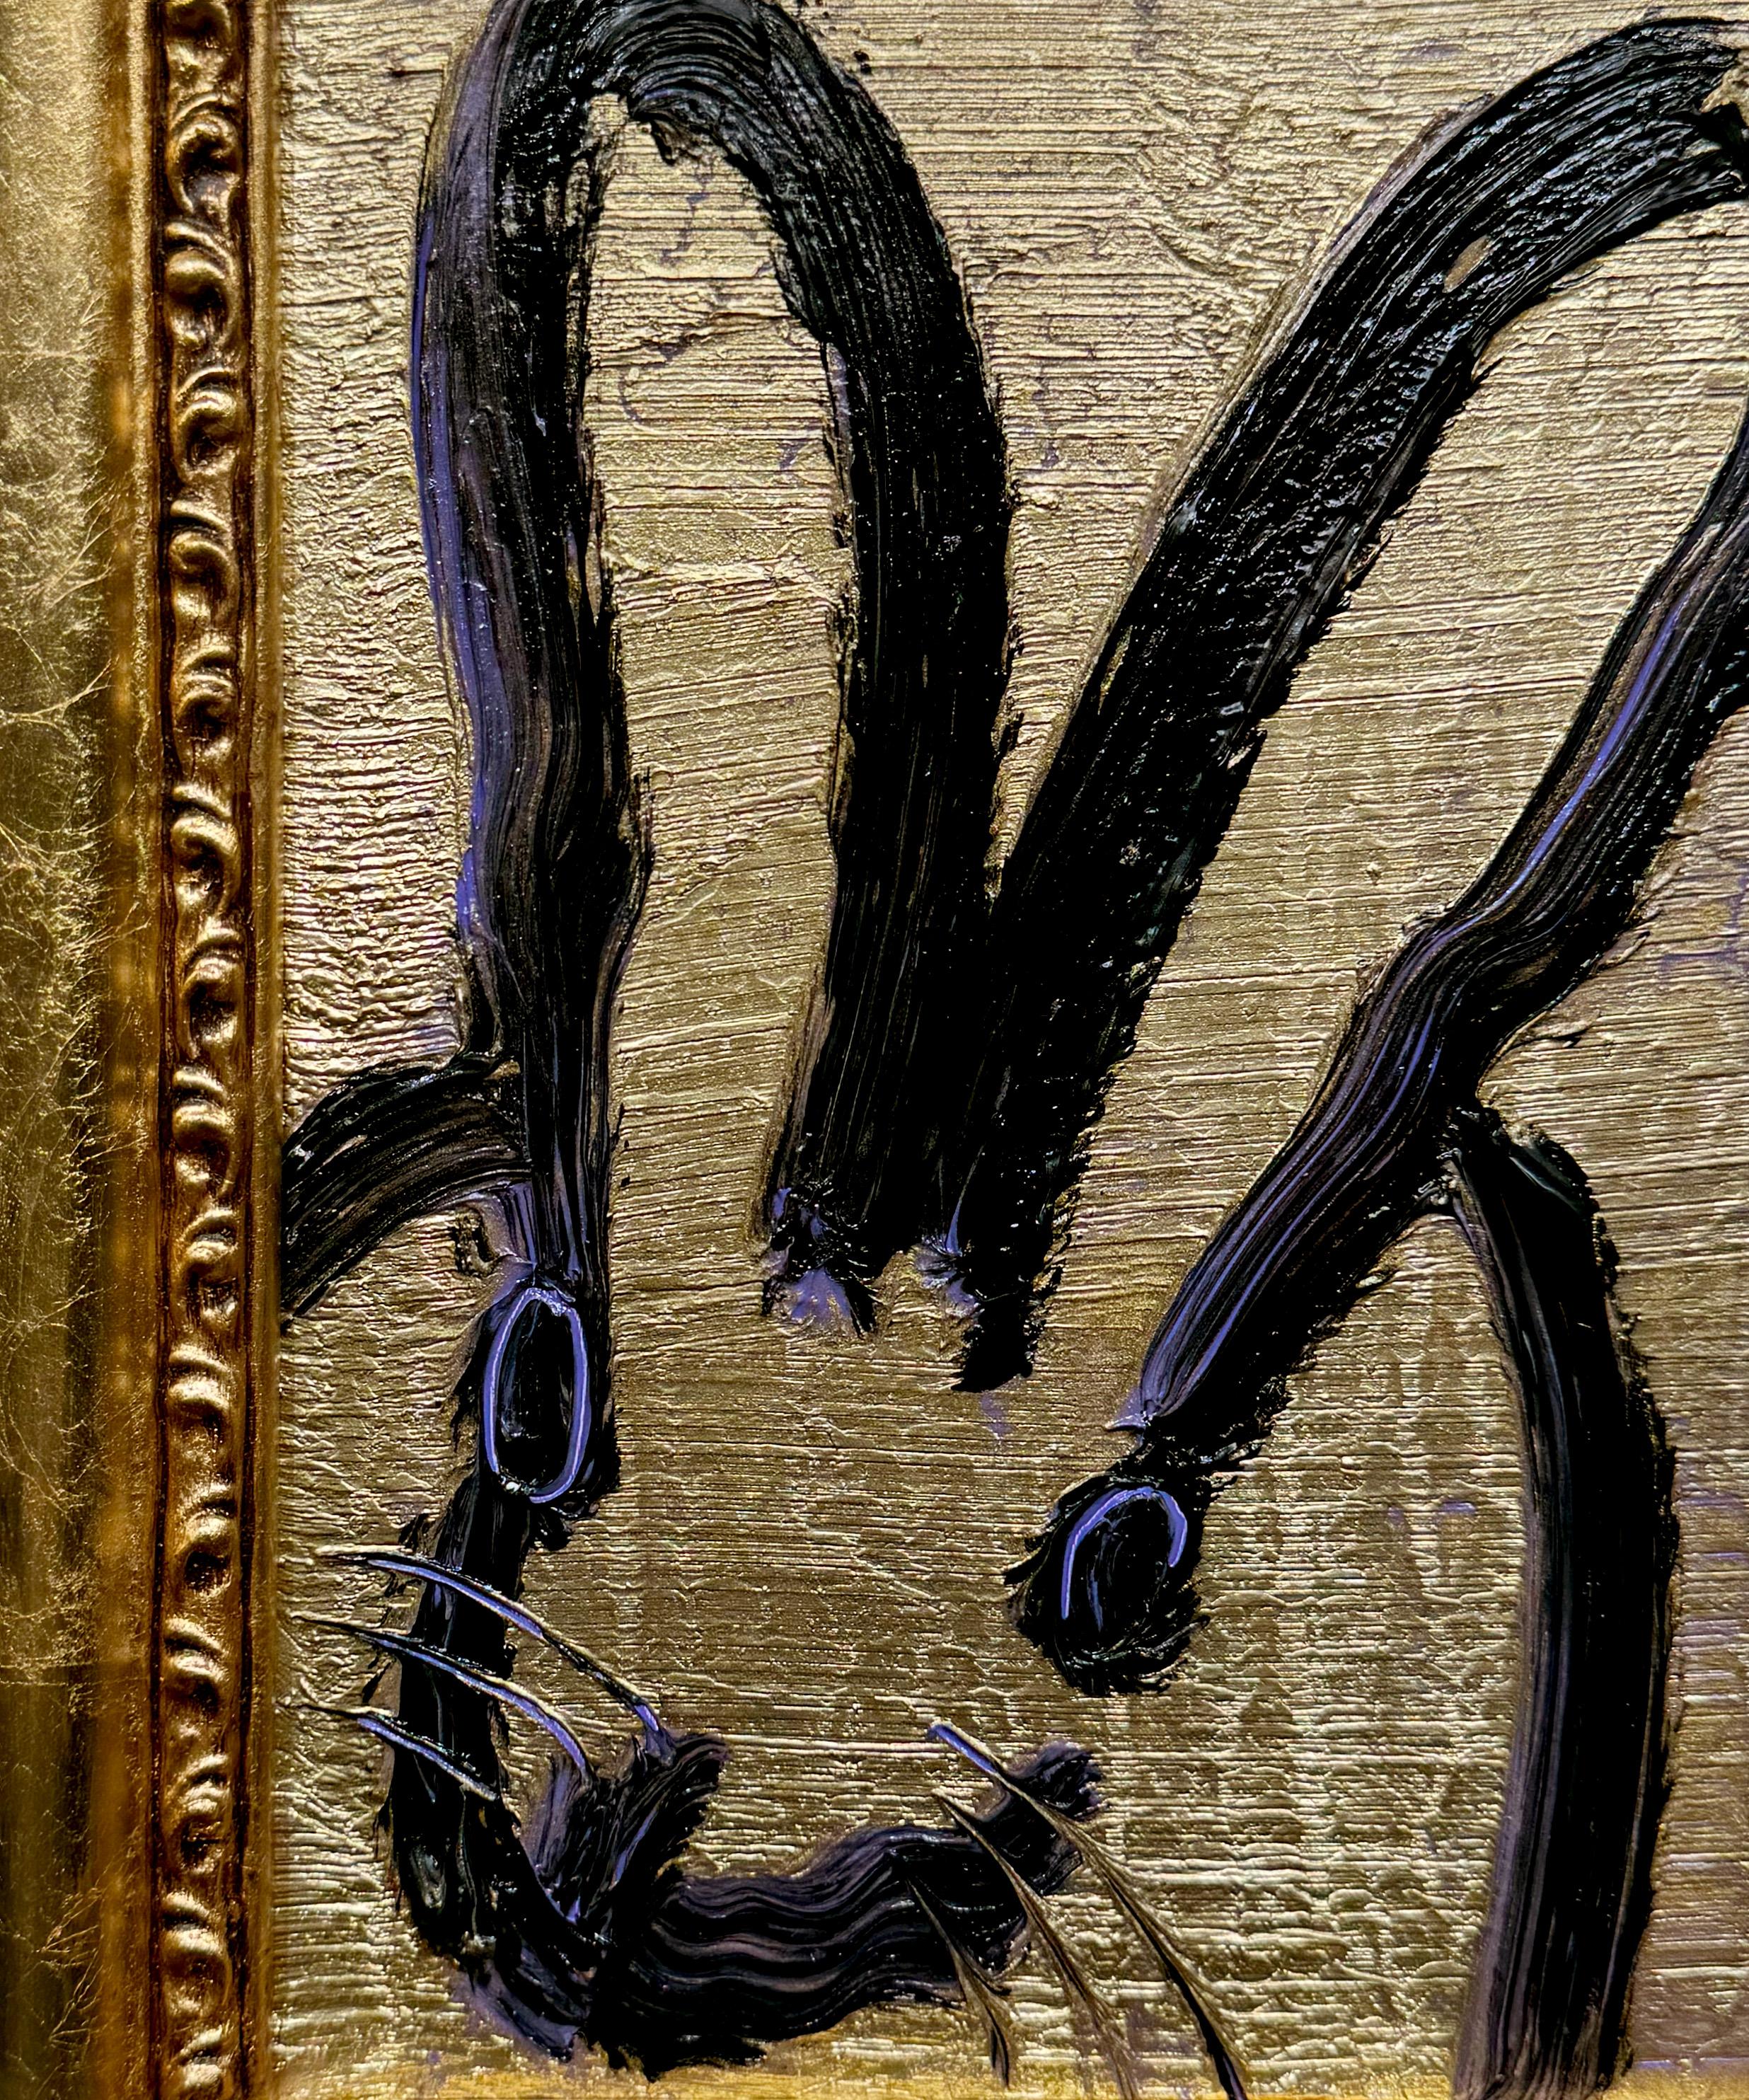 ‘Golden Marilyn’ is a signature gestural bunny painting by Hunt Slonem. The gestural bunny can be found throughout Slonem’s Neo-expressionist body of work. The background of the painting is a bright gold, contrasting the black and lavender line that